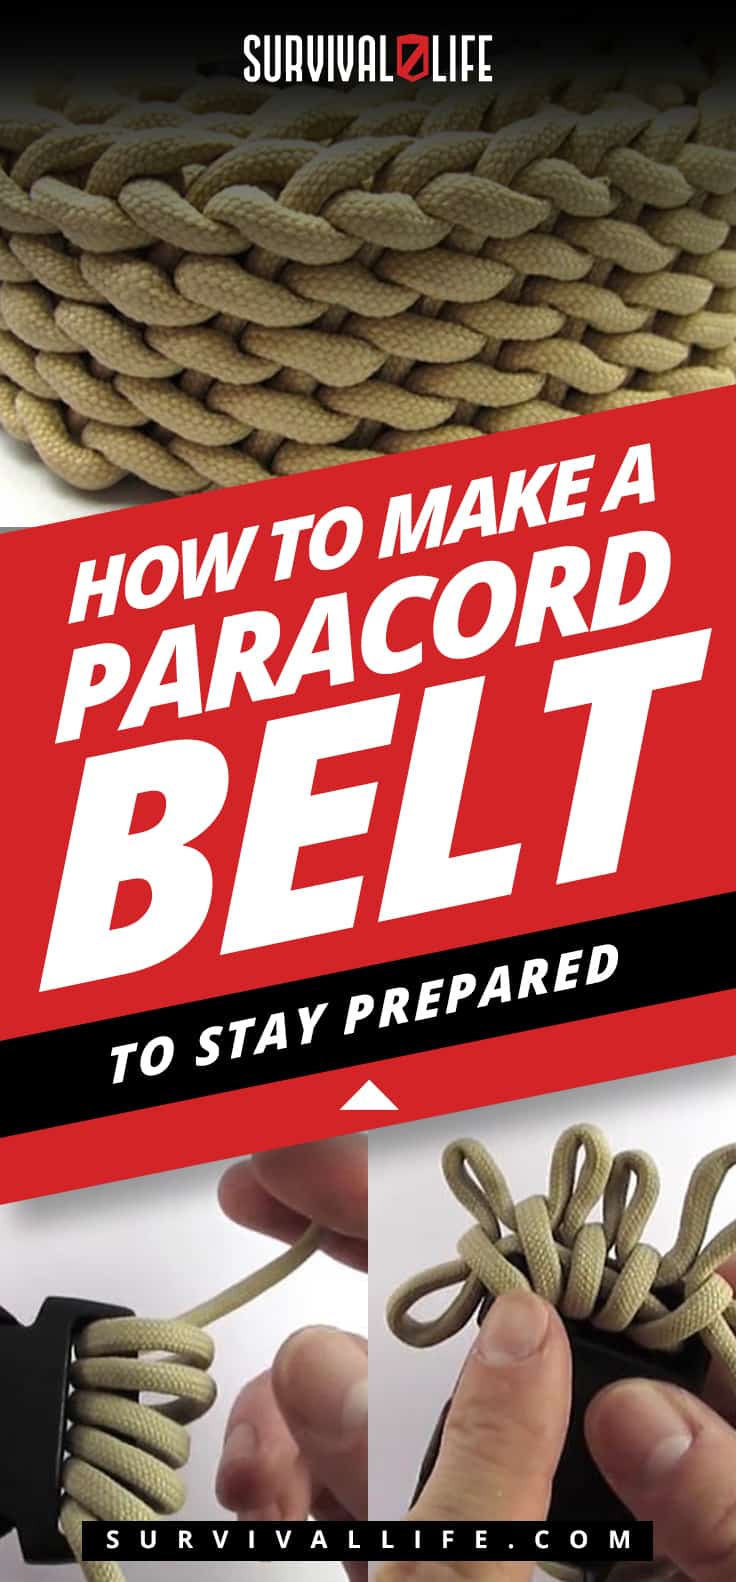 How To Make A Paracord Belt To Stay Prepared [Video] | https://survivallife.com/make-paracord-belt/